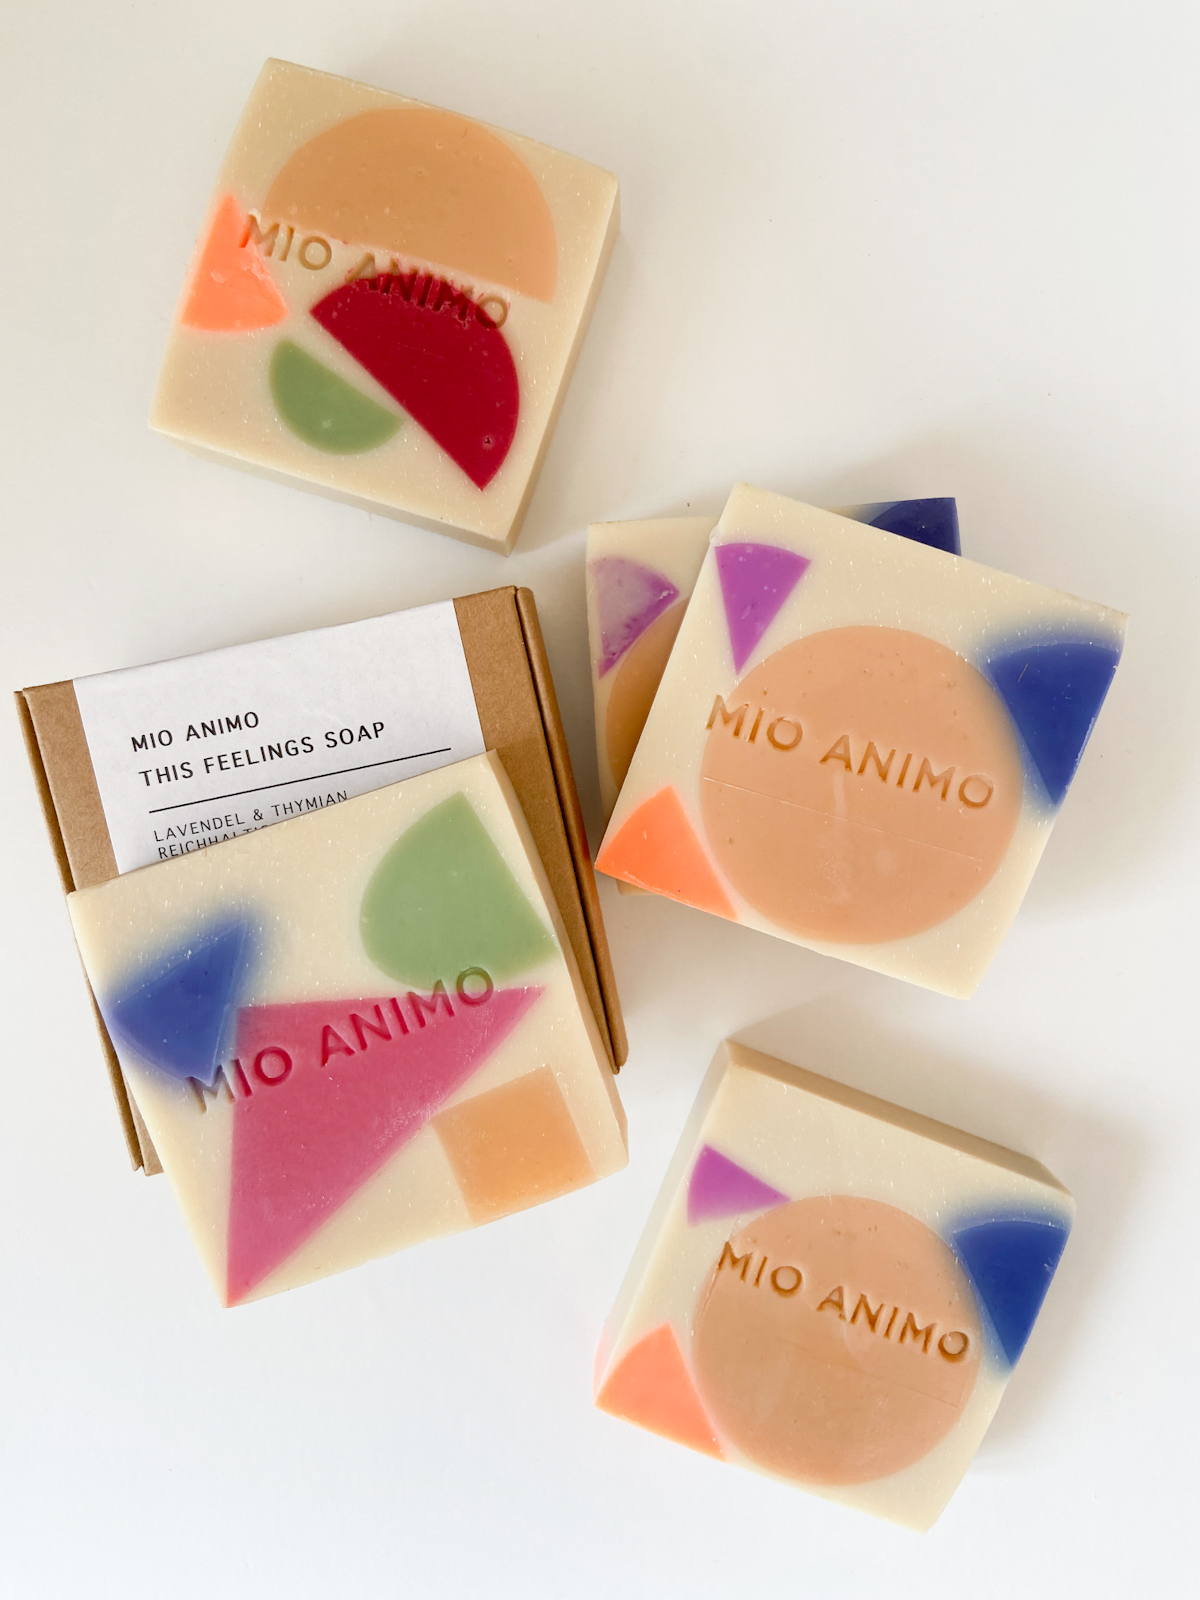 MIO ANIMO - THIS FEELINGS SOAP - Limited Edition 5